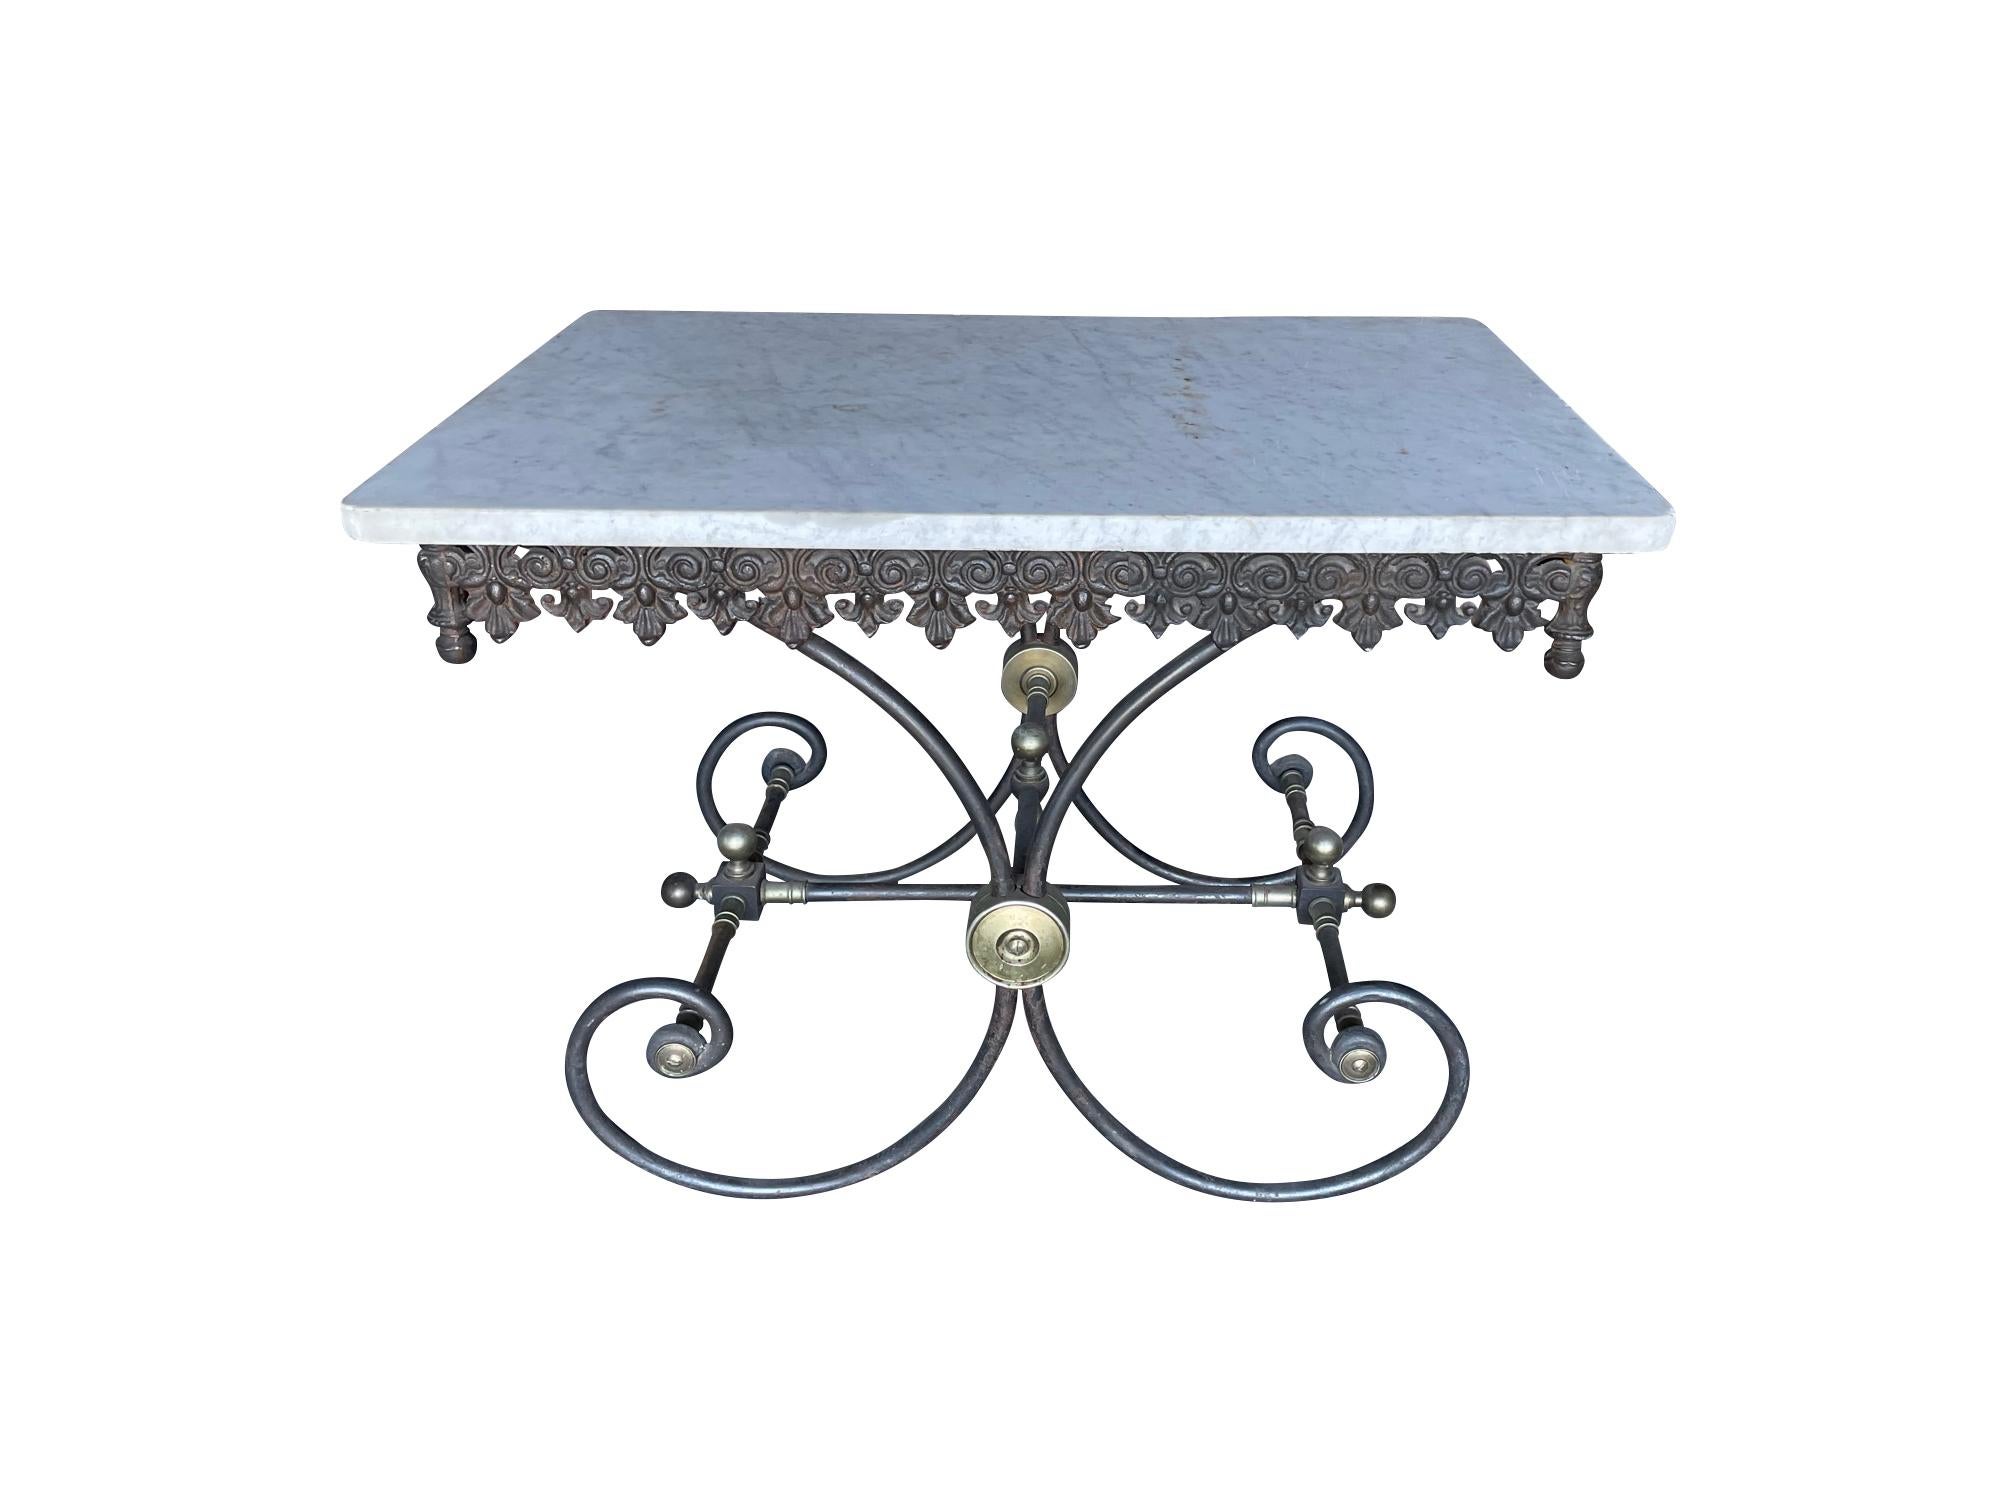 A French Patisserie table with an iron foliate frieze, scrolling iron base with decorative brass finials and a thick marble top

This table would work well as a console table in a hallway, it is an unusual piece that would enhance any interior